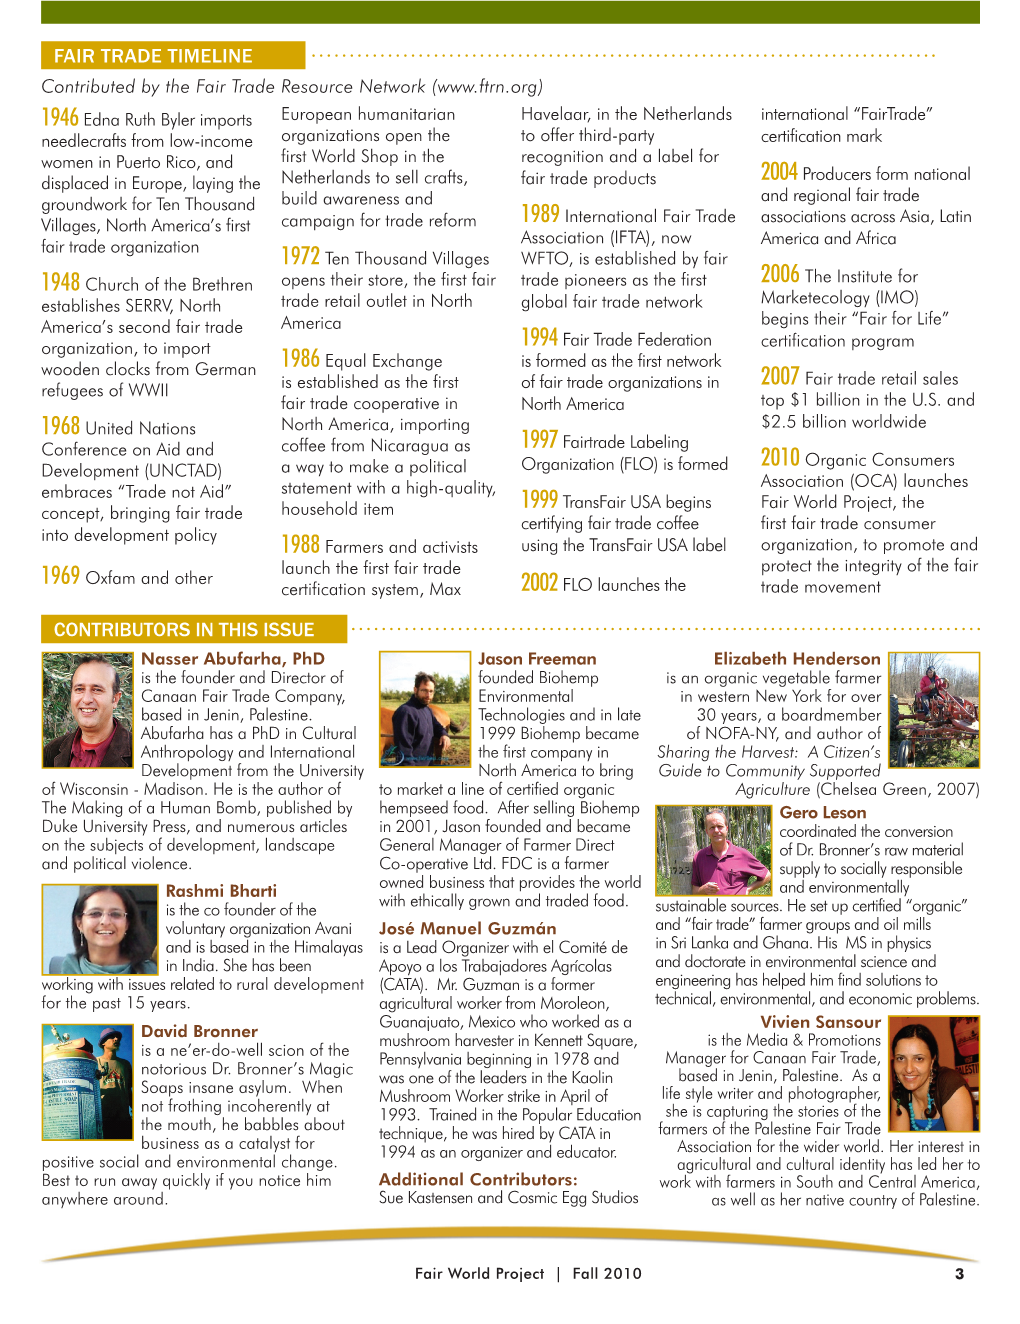 Fair Trade Timeline Contributors in This Issue